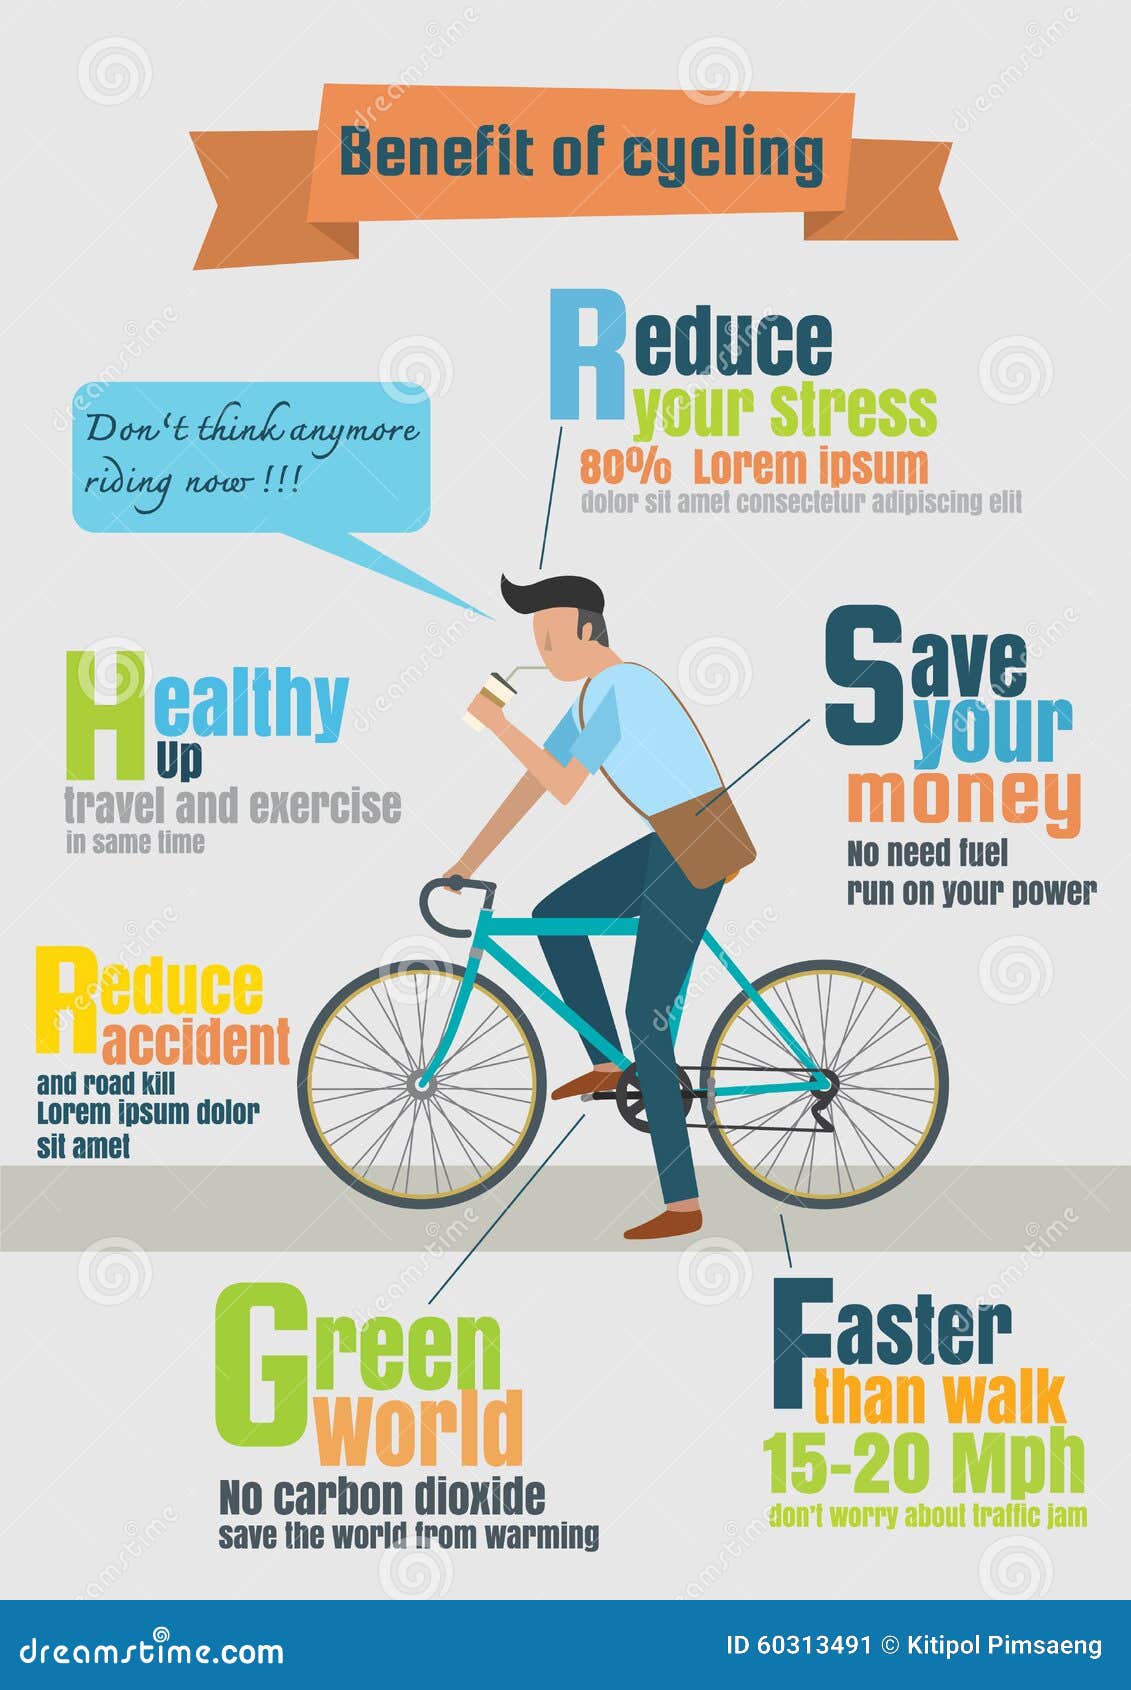 Do You Know Benefits Of Cycling Related To Physical And Mental Health inside Cycling Benefits For Knees